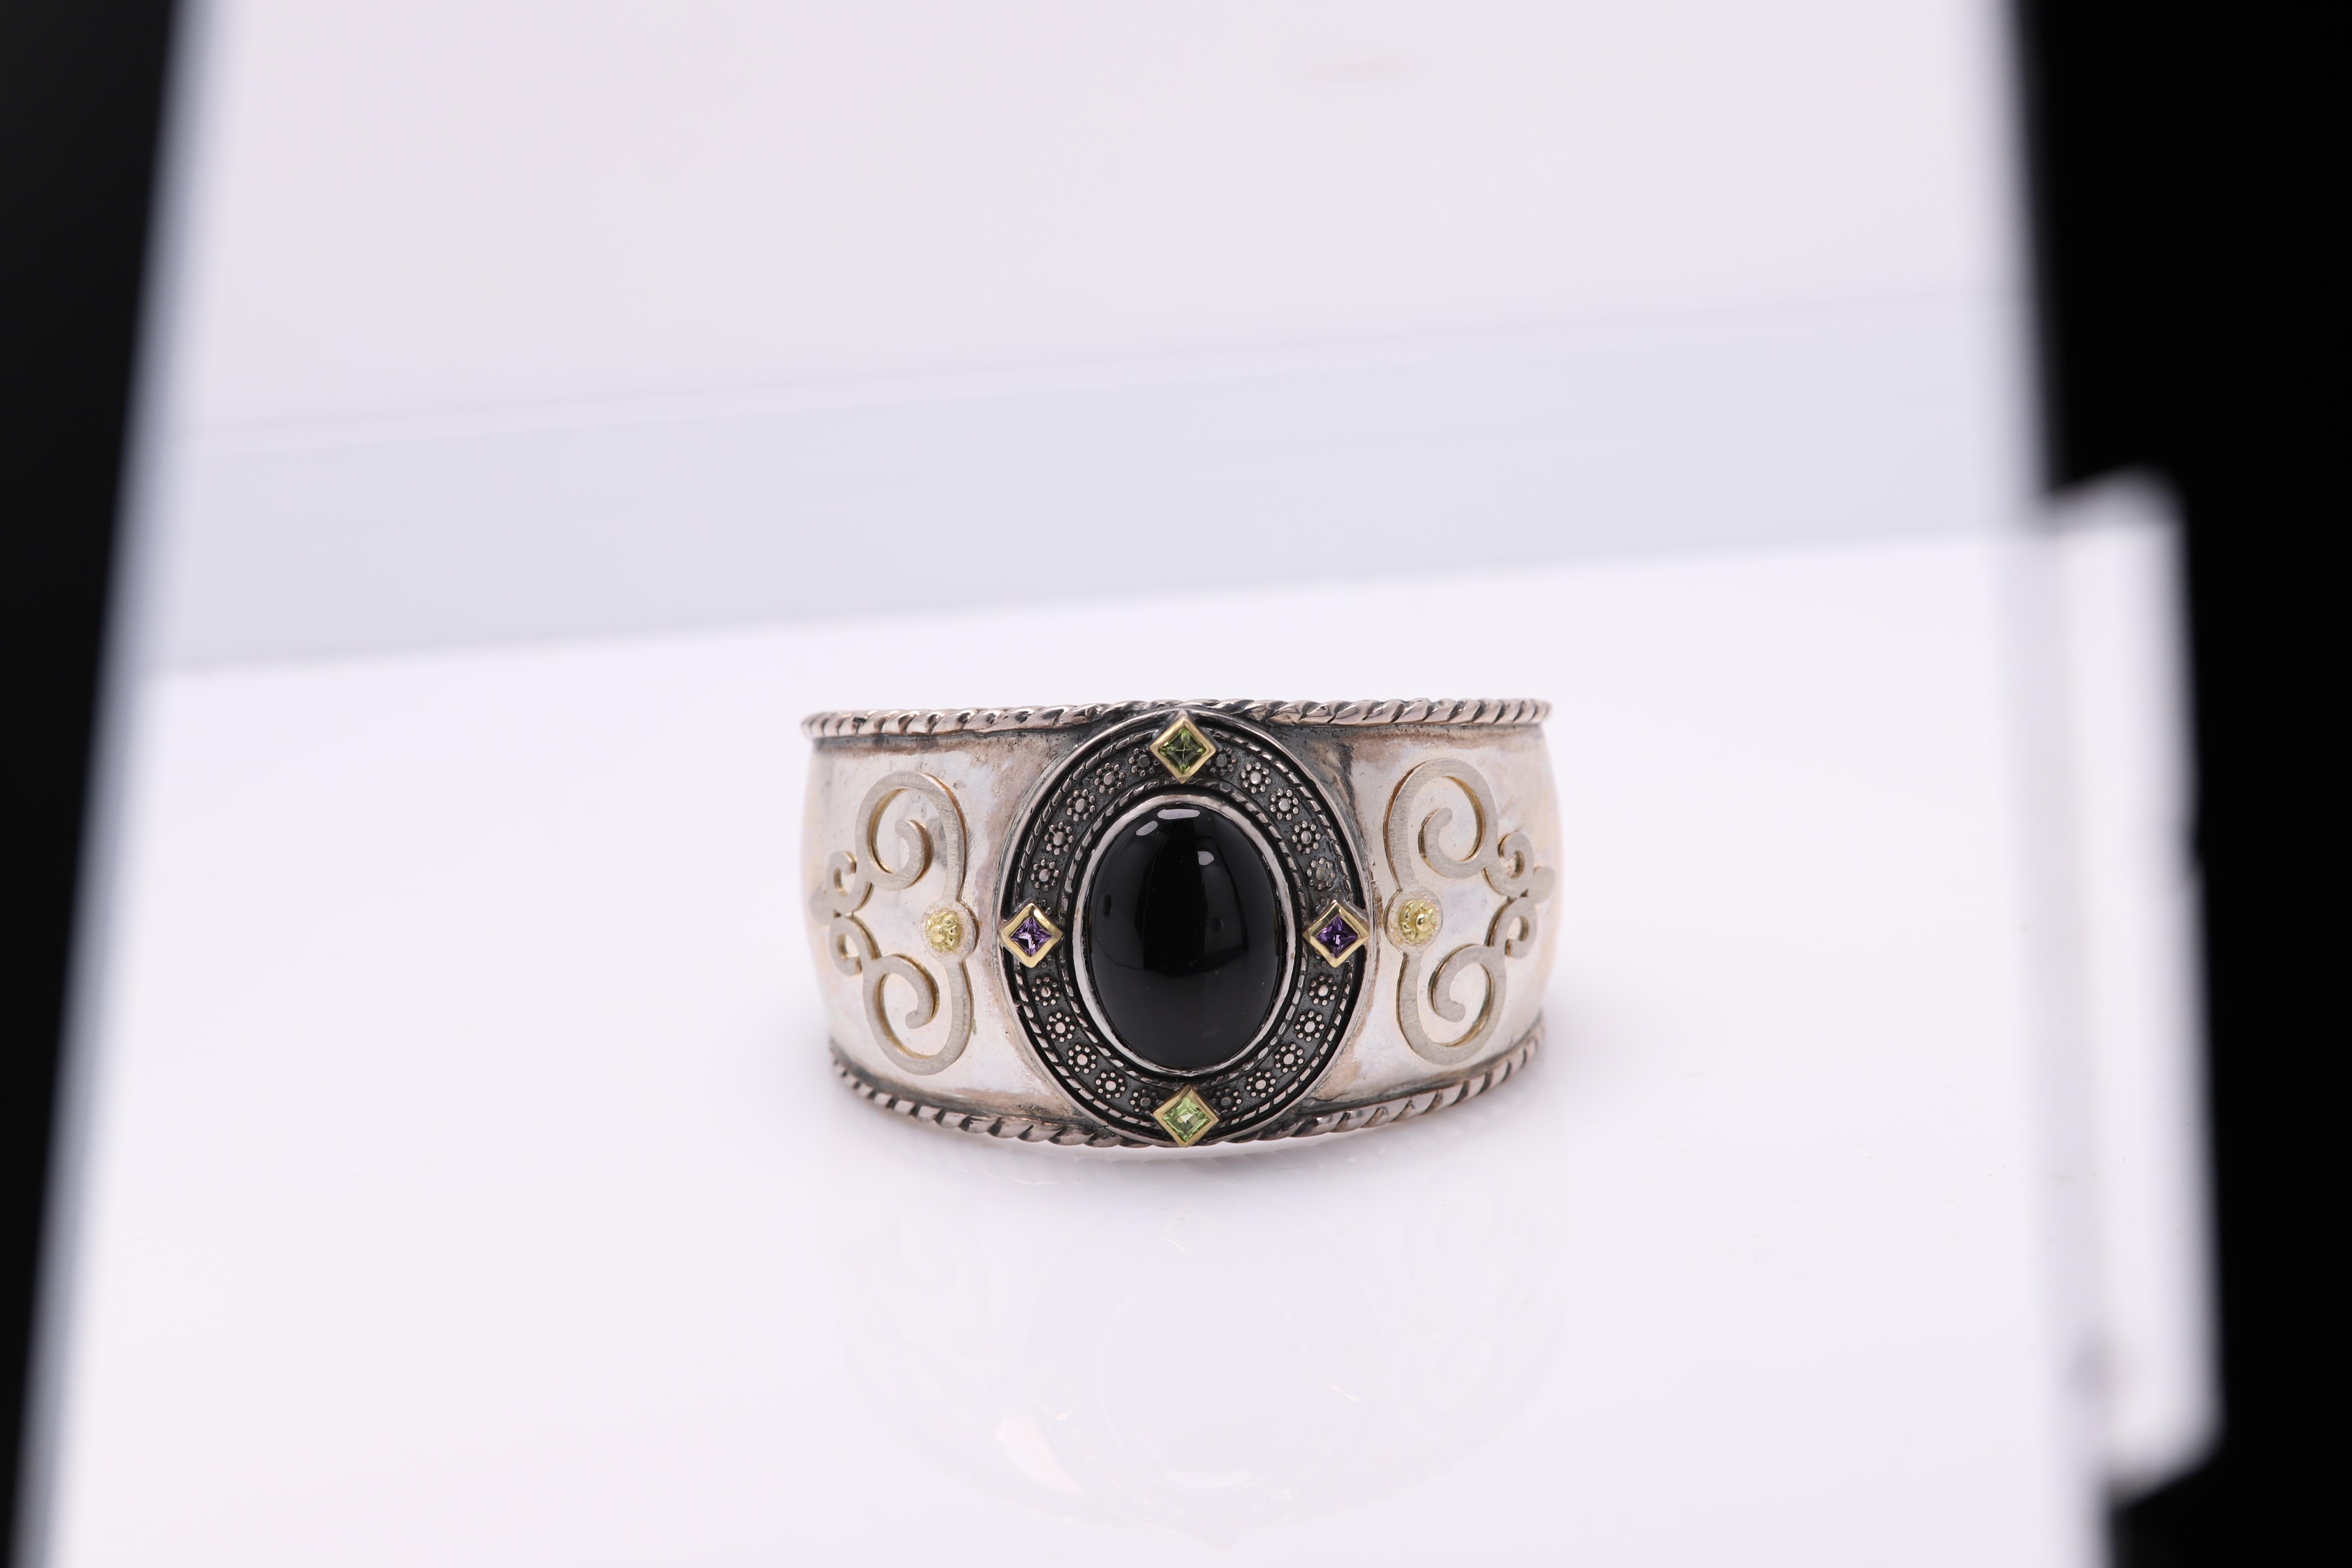 Venetian Black Murano Glass Antique / Gothic Style Cuff Bracelet
Sterling Silver 925, approx 54.0 Grams, 
with small natural Amethyst and Peridot stones,
set with real 18K Yellow Gold Ornaments, 
Cuff width Size: 40 mm / 1.5' Inch graduated to